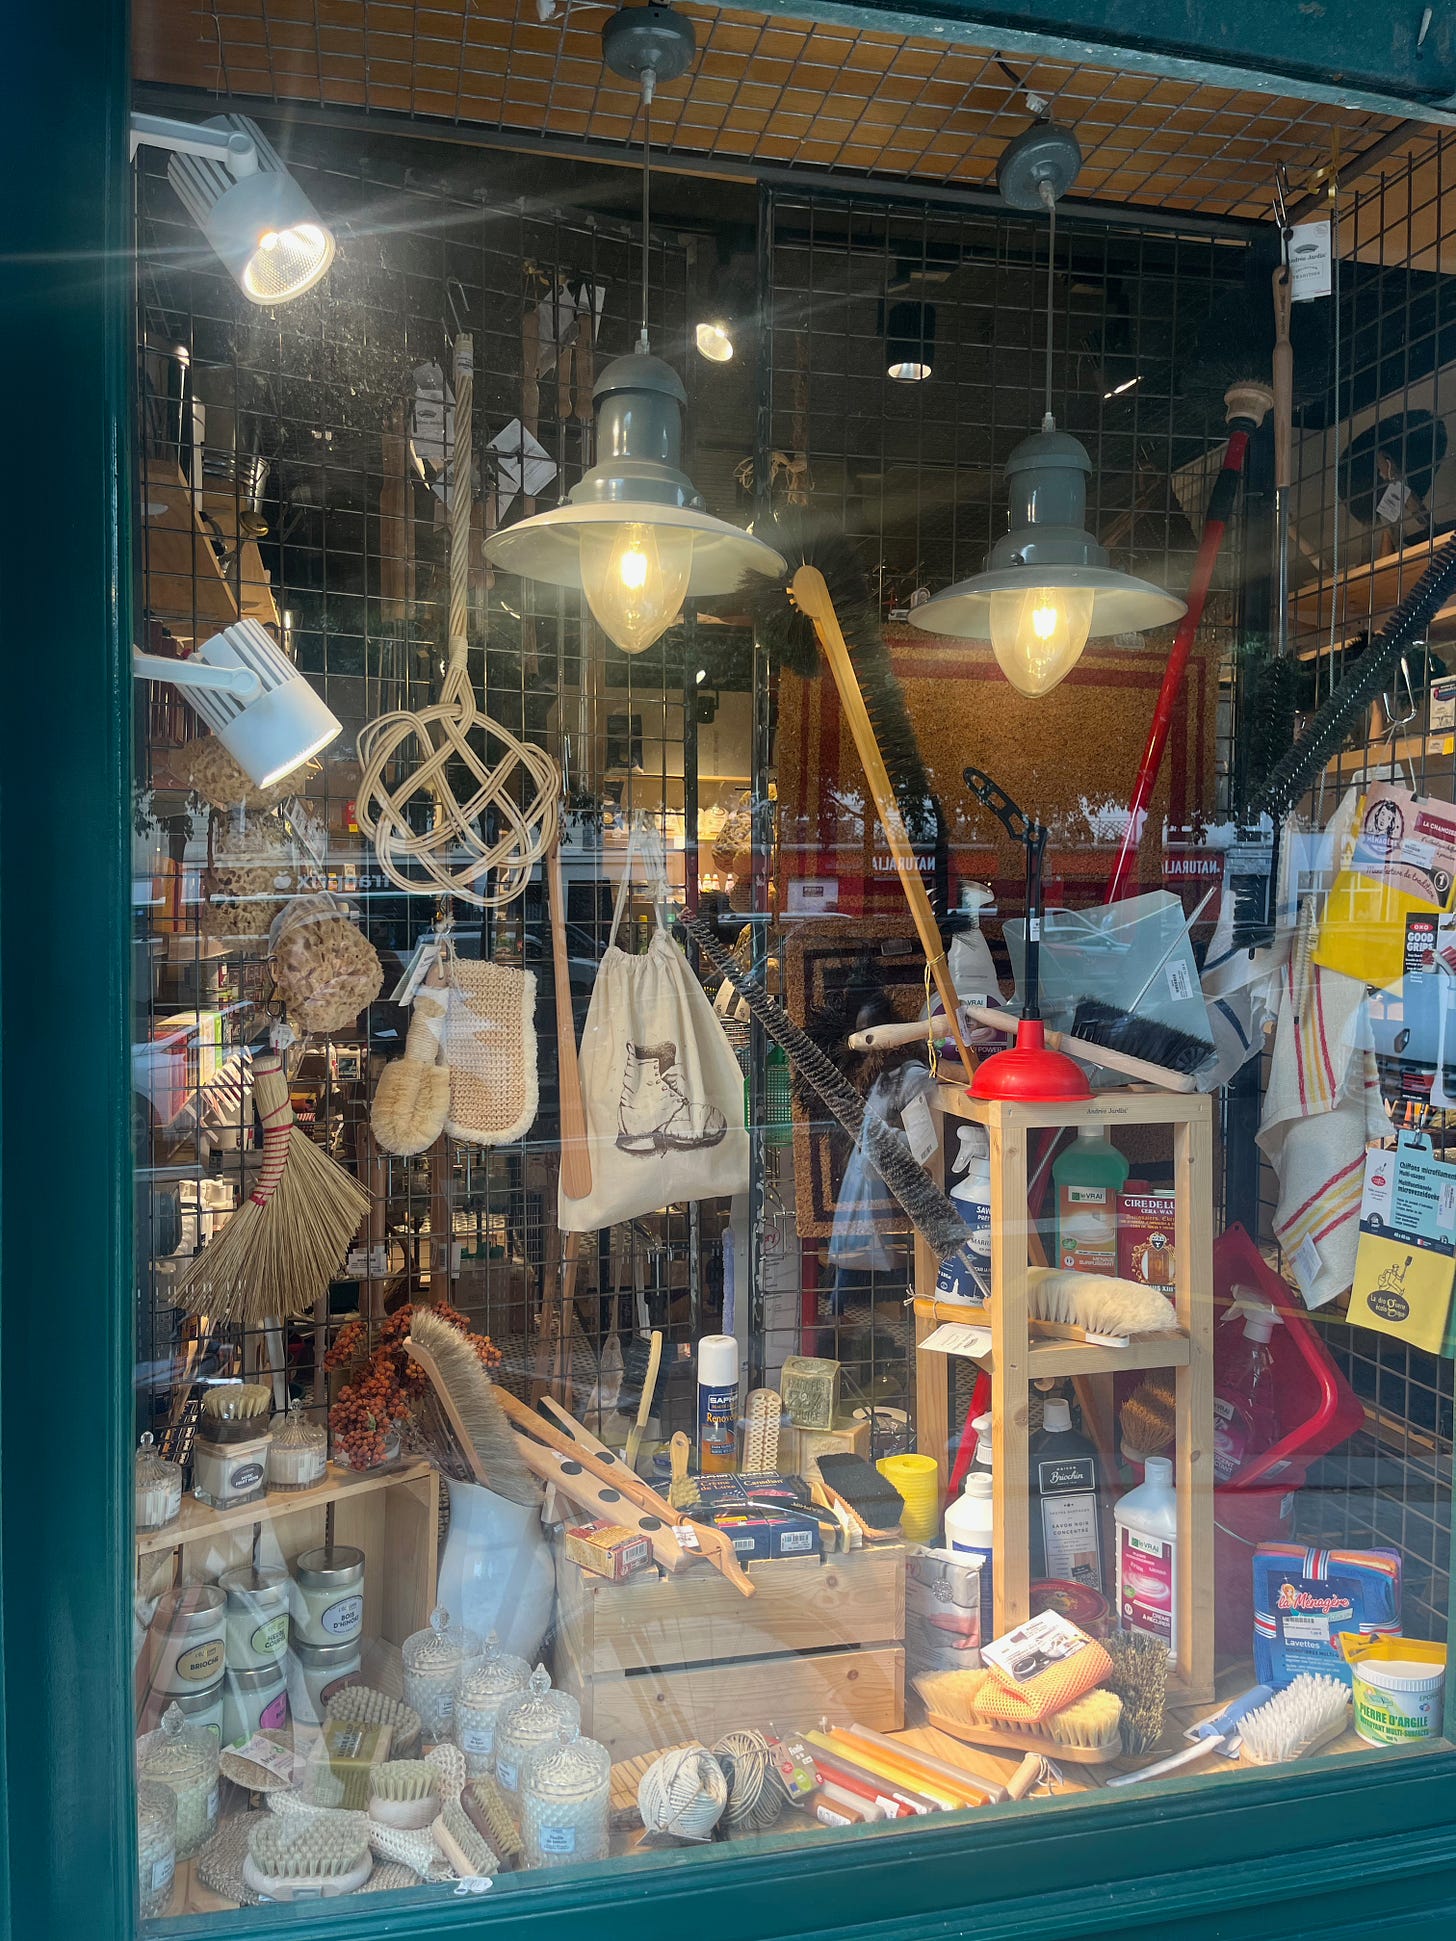 a closer look through the store window, containing a serious plethora of brushes and cleaning supplies. Jackpot.